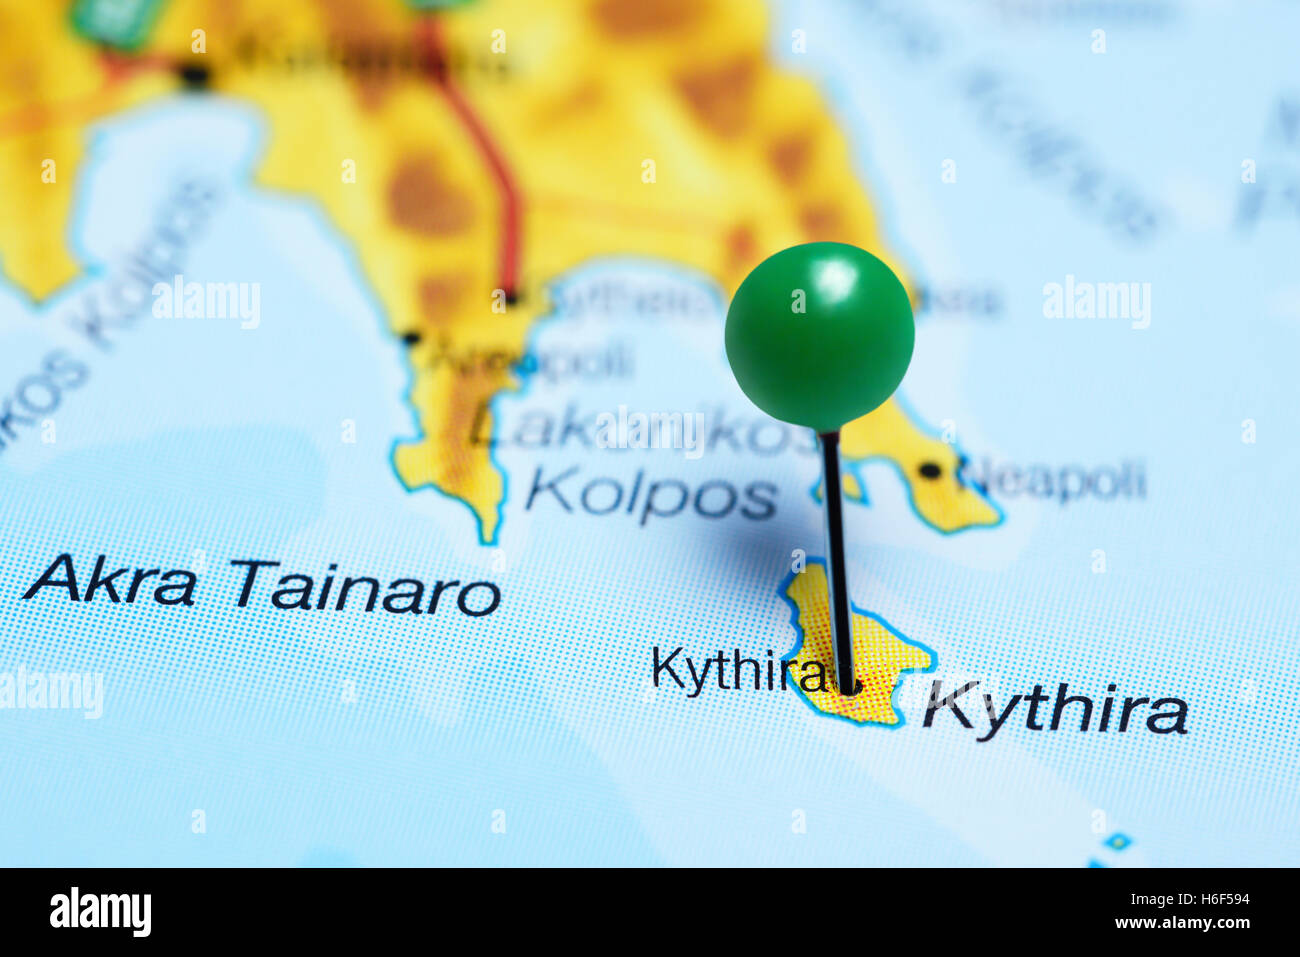 Kythira pinned on a map of Greece Stock Photo